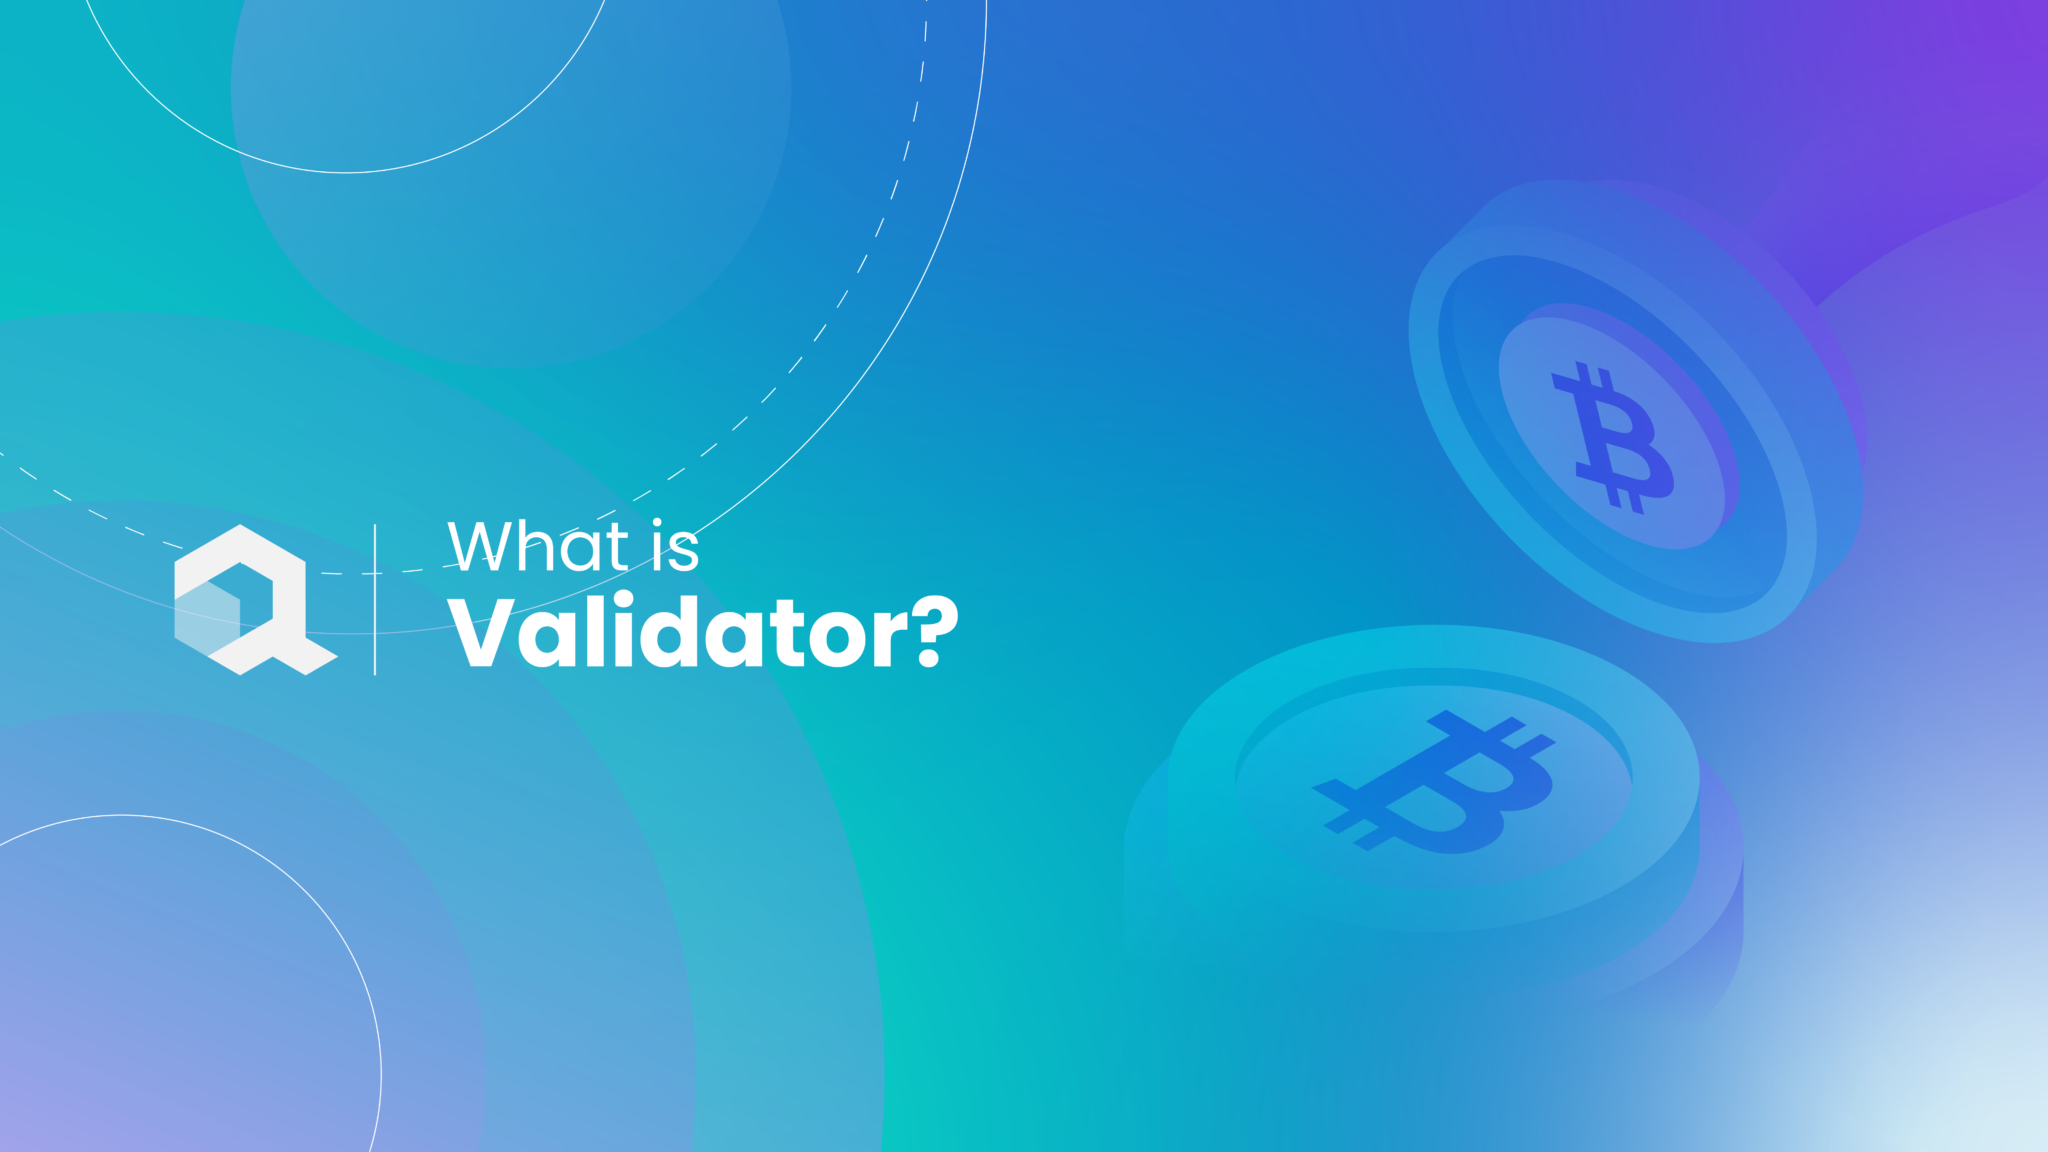 What Is a Validator?